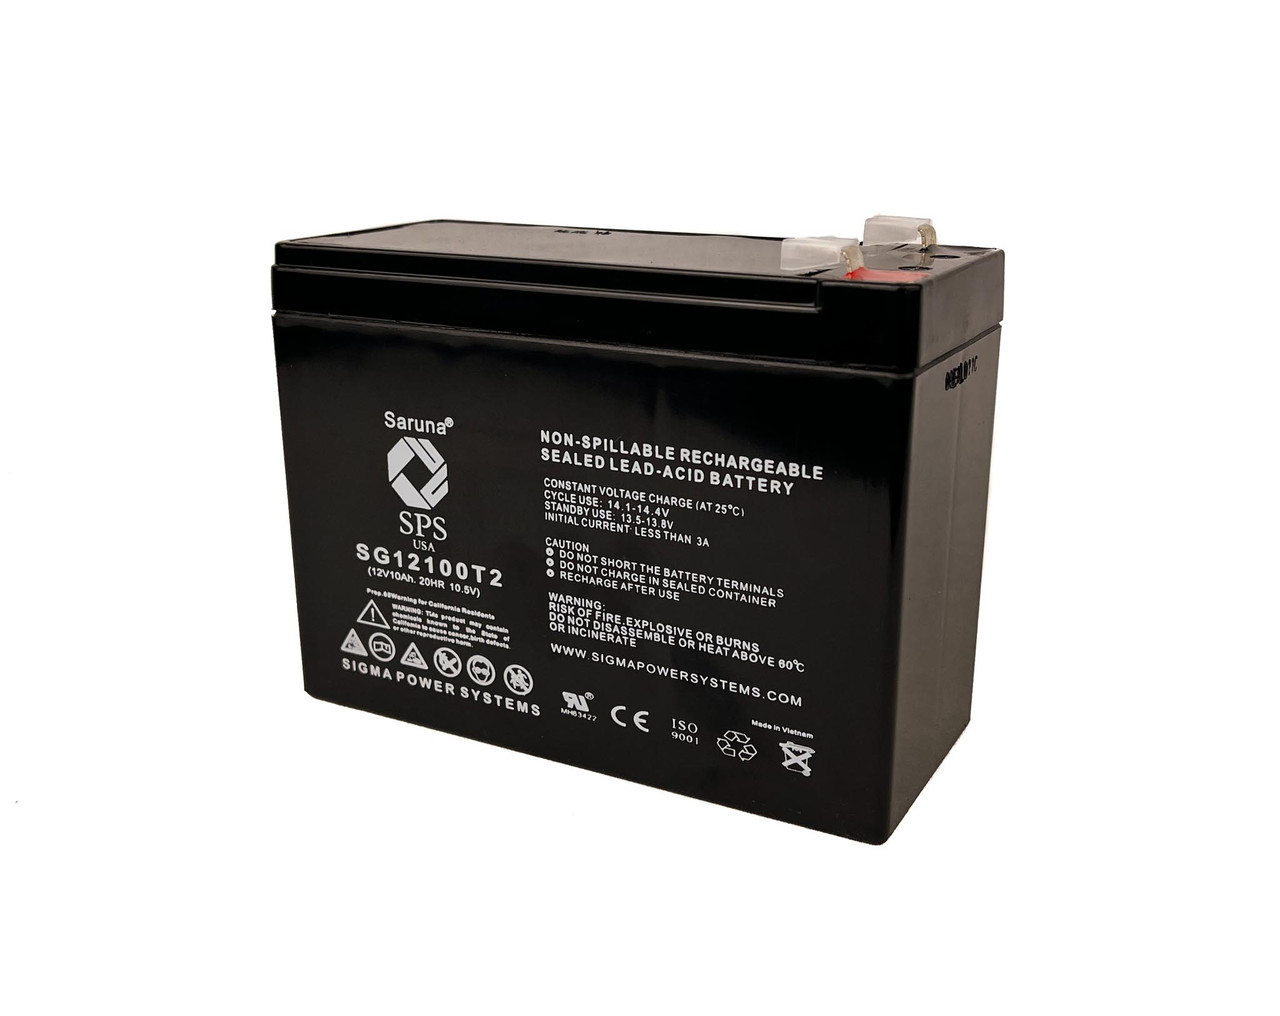 Raion Power 12V 10Ah Non-Spillable Replacement Rechargebale Battery for FullRiver DC10-12